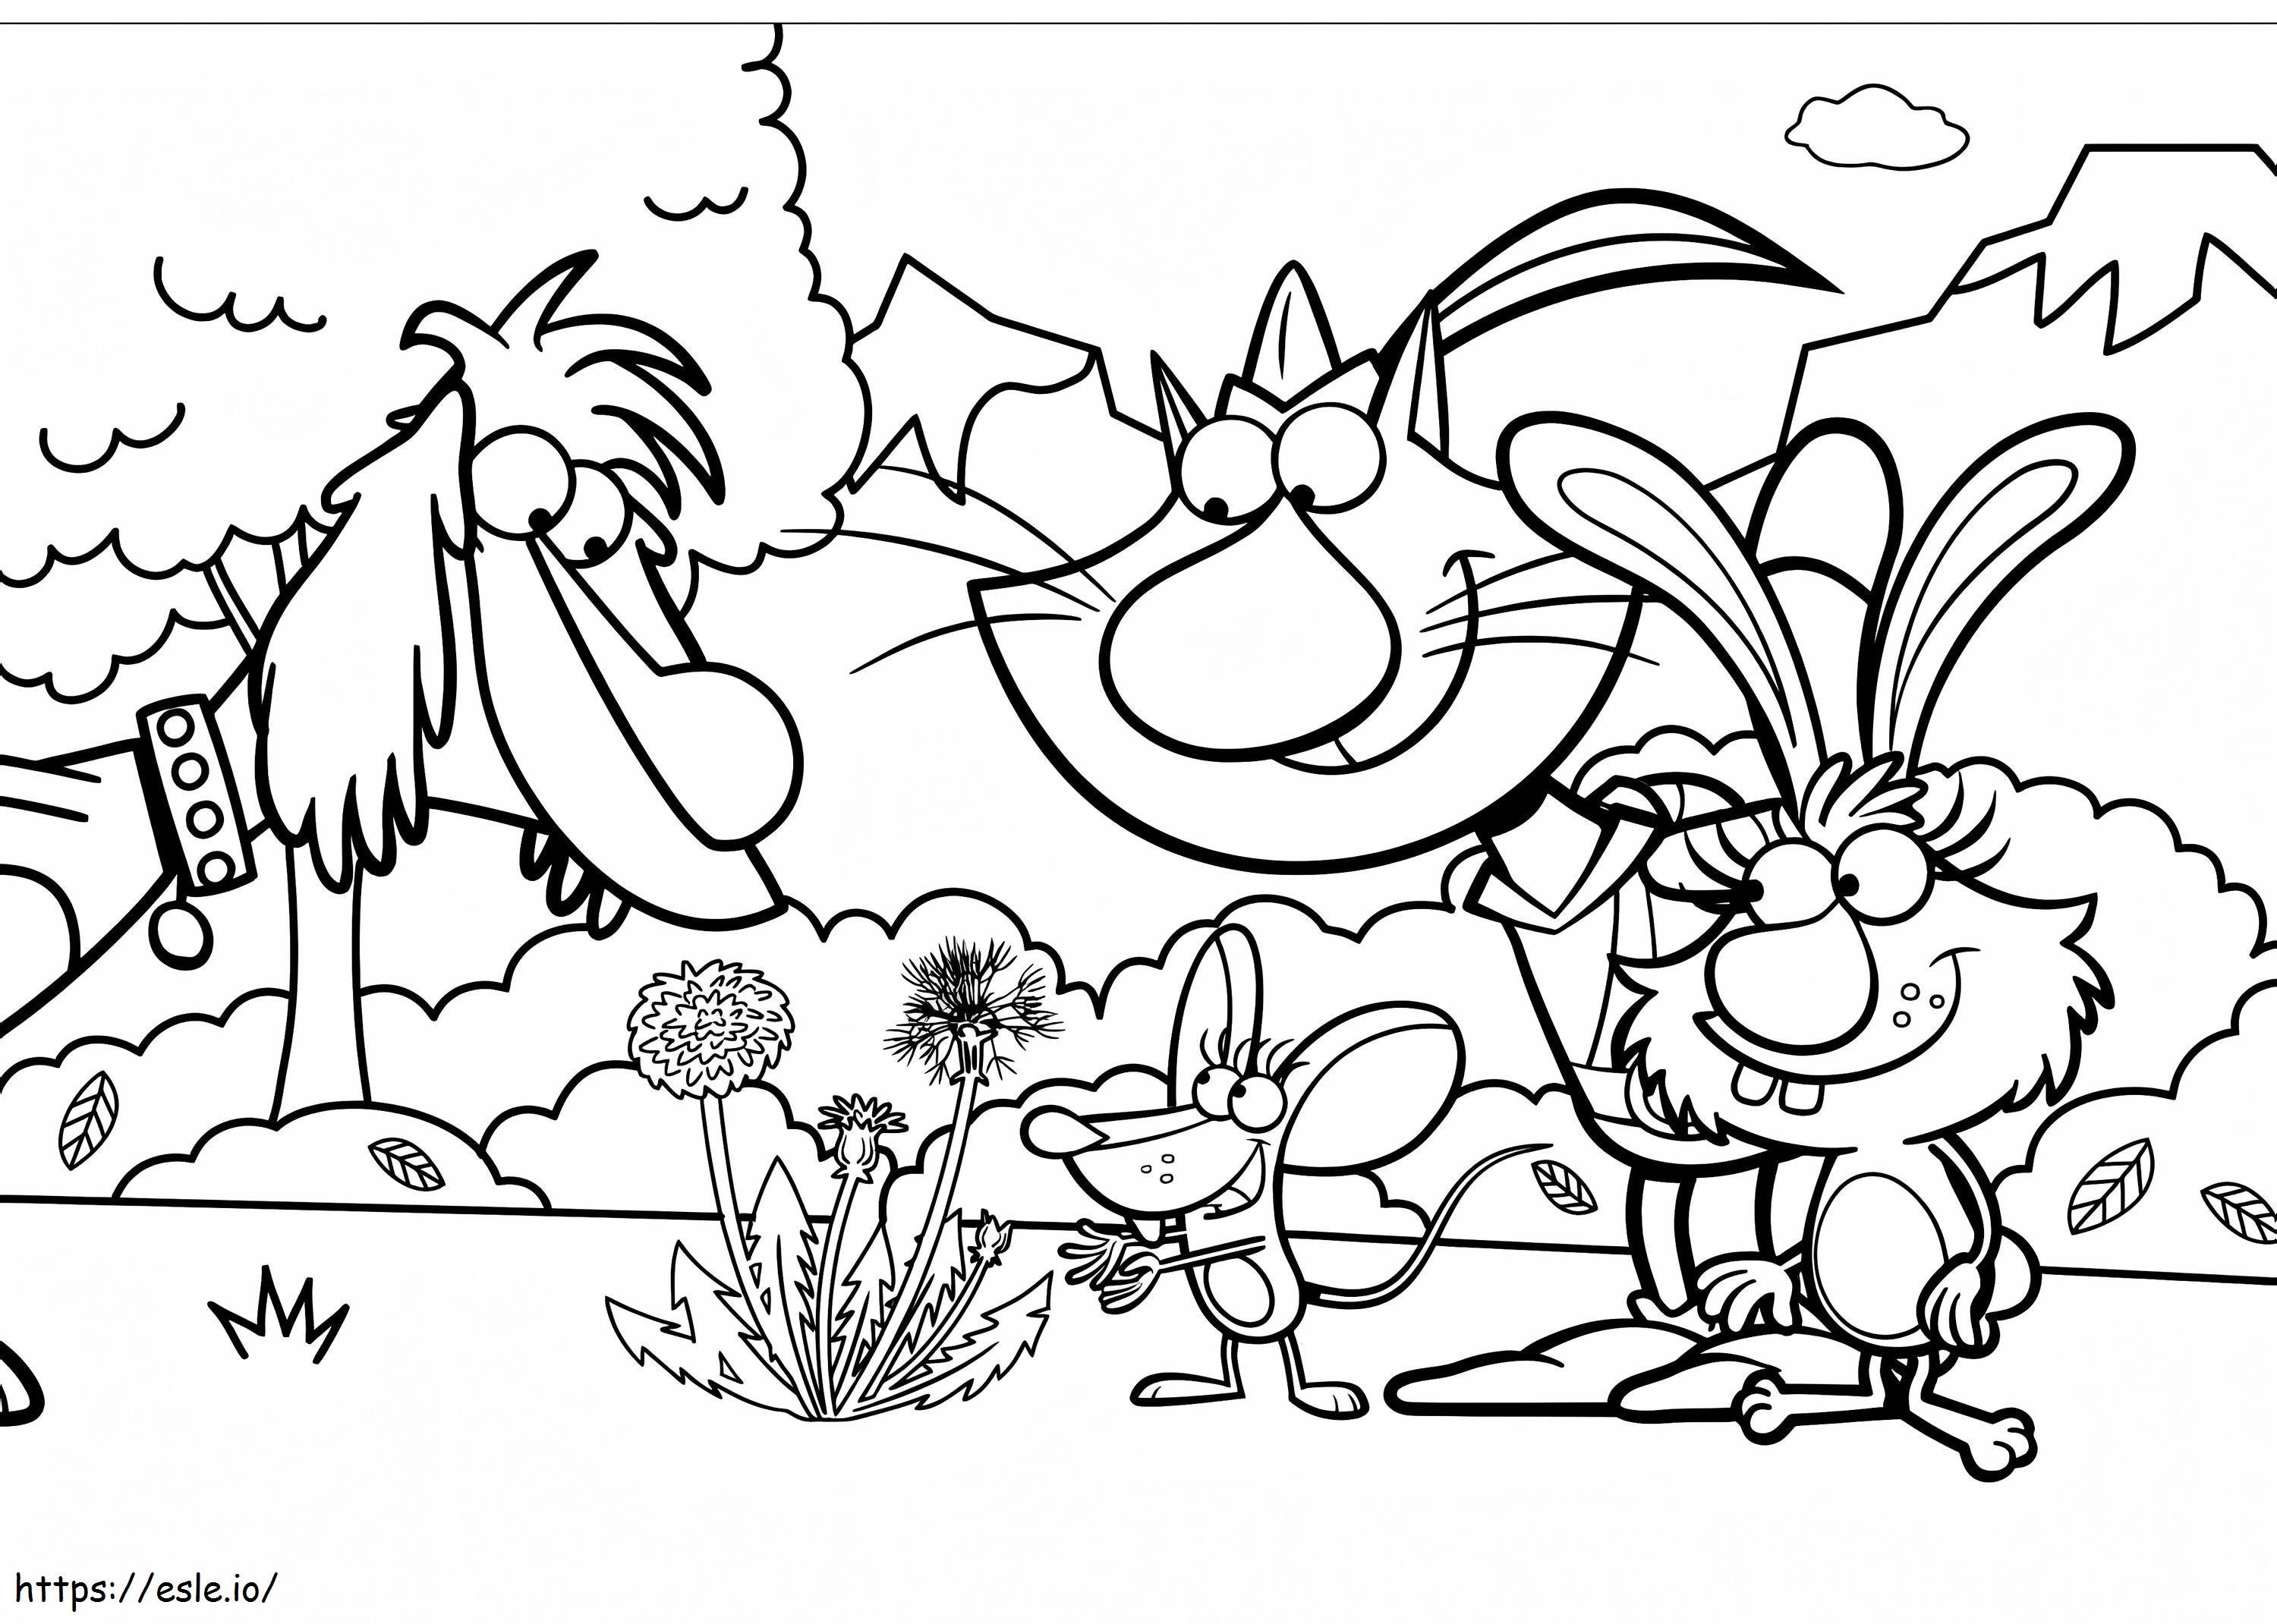 Nature Cat 2 coloring page